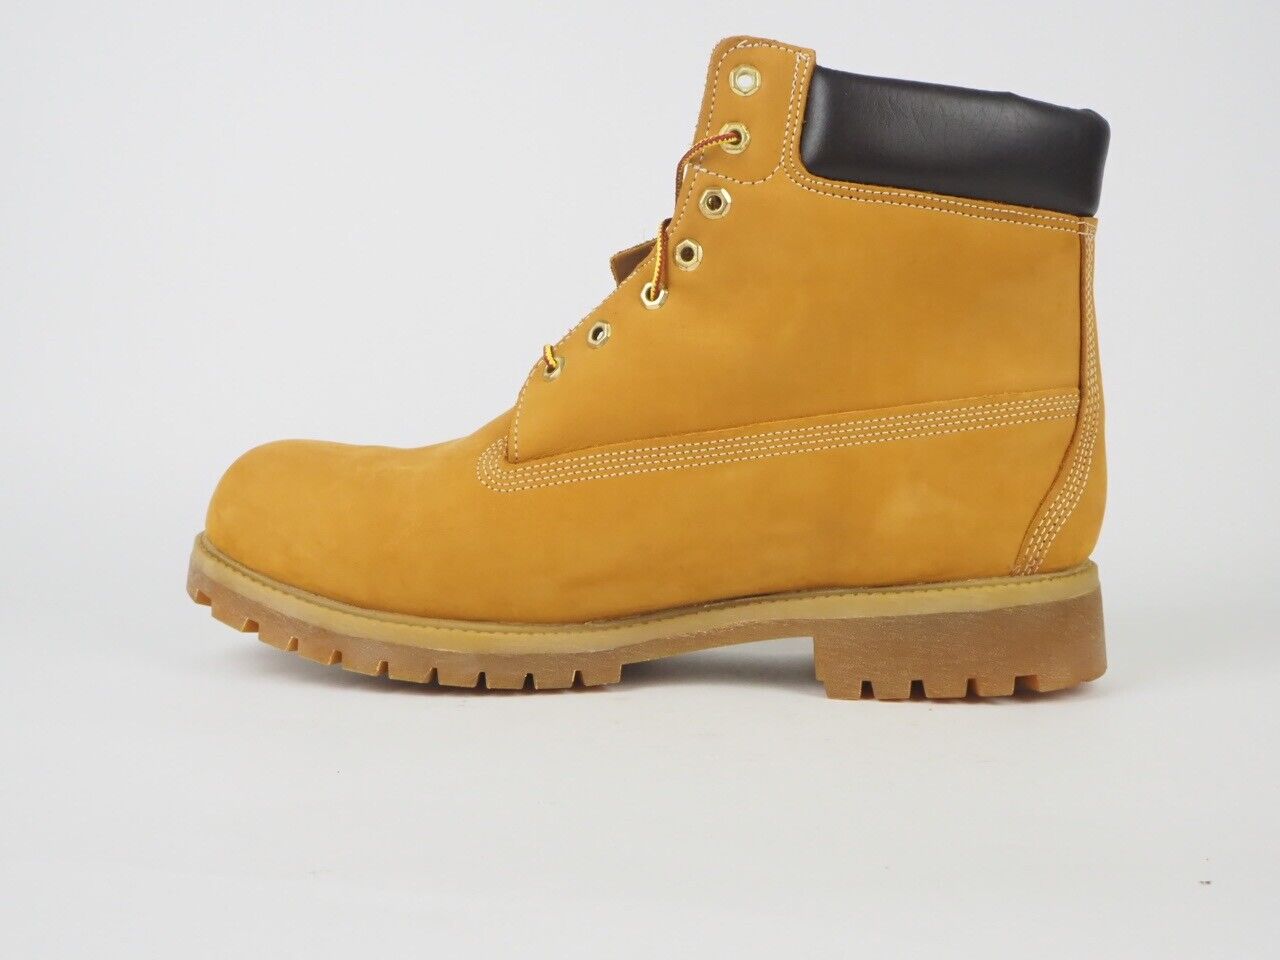 Mens Timberland 6 Inch Premium 10061 Wheat Leather Lace Up Waterproof Boots